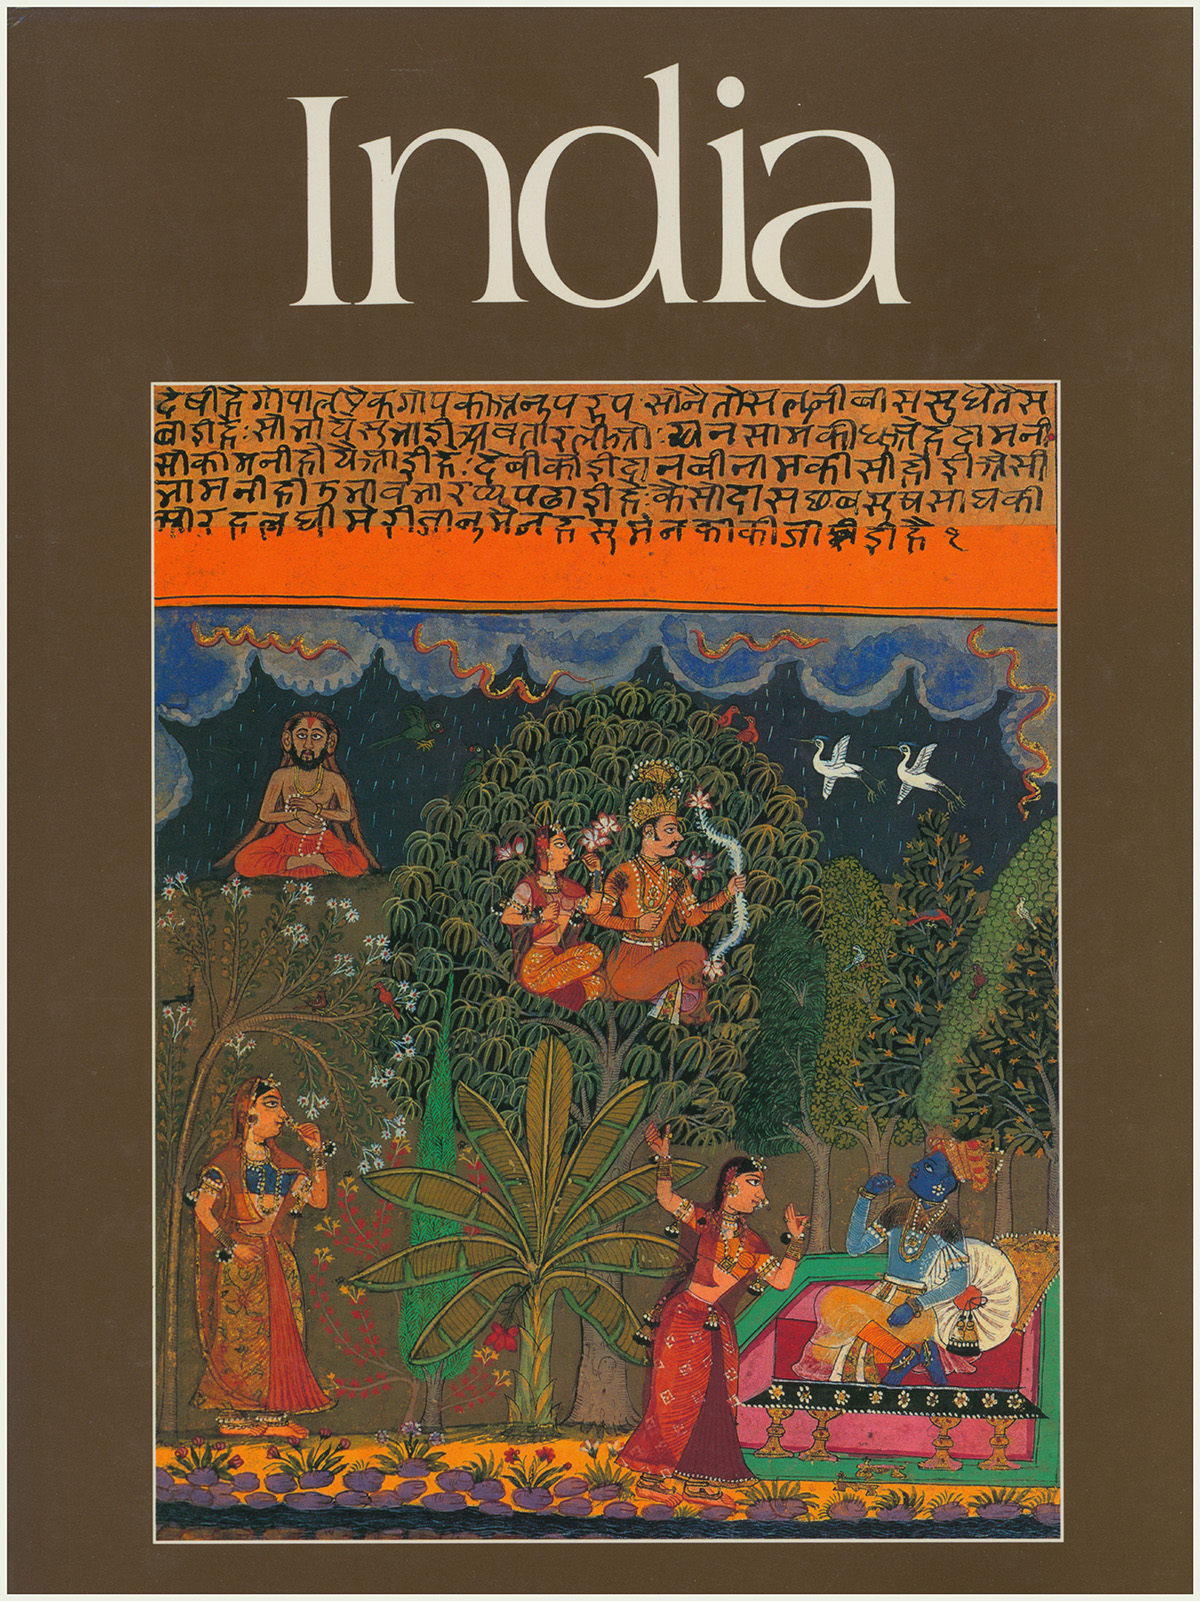 Mathur, Asharani (editor) - India (Specially Published for the Festival of India)